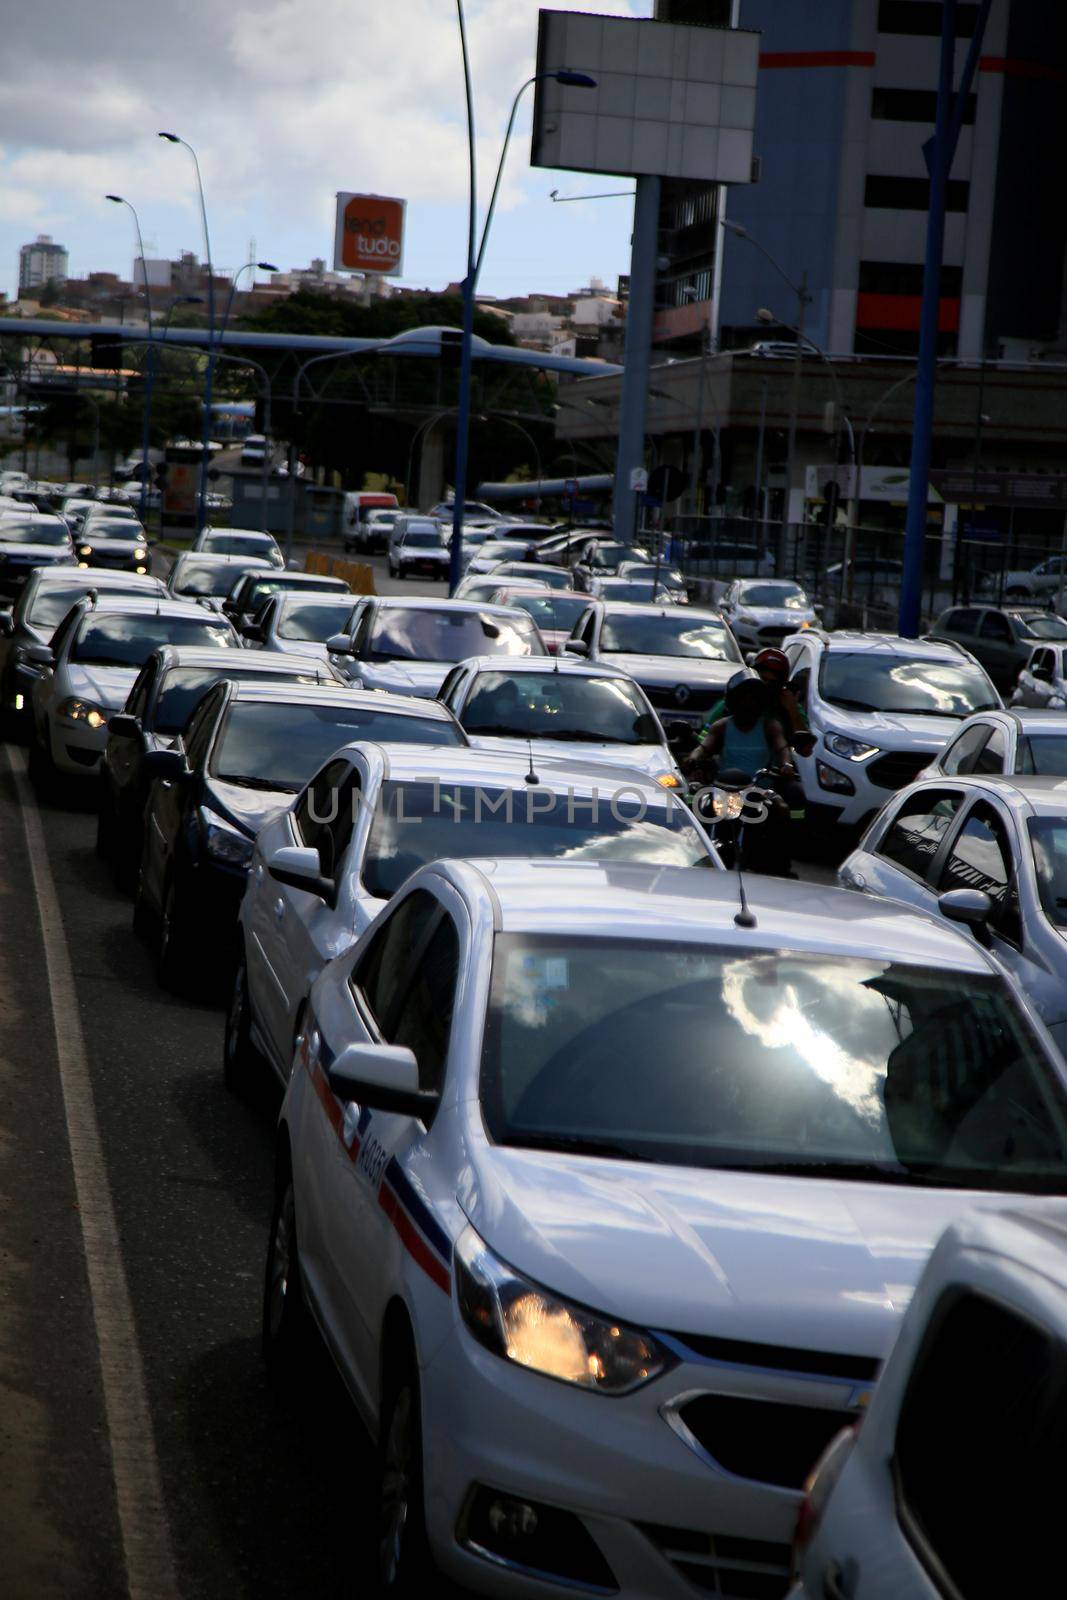 salvador, bahia, brazil - july 20, 2021: movement of vehicles in congestion in the city of Salvador.